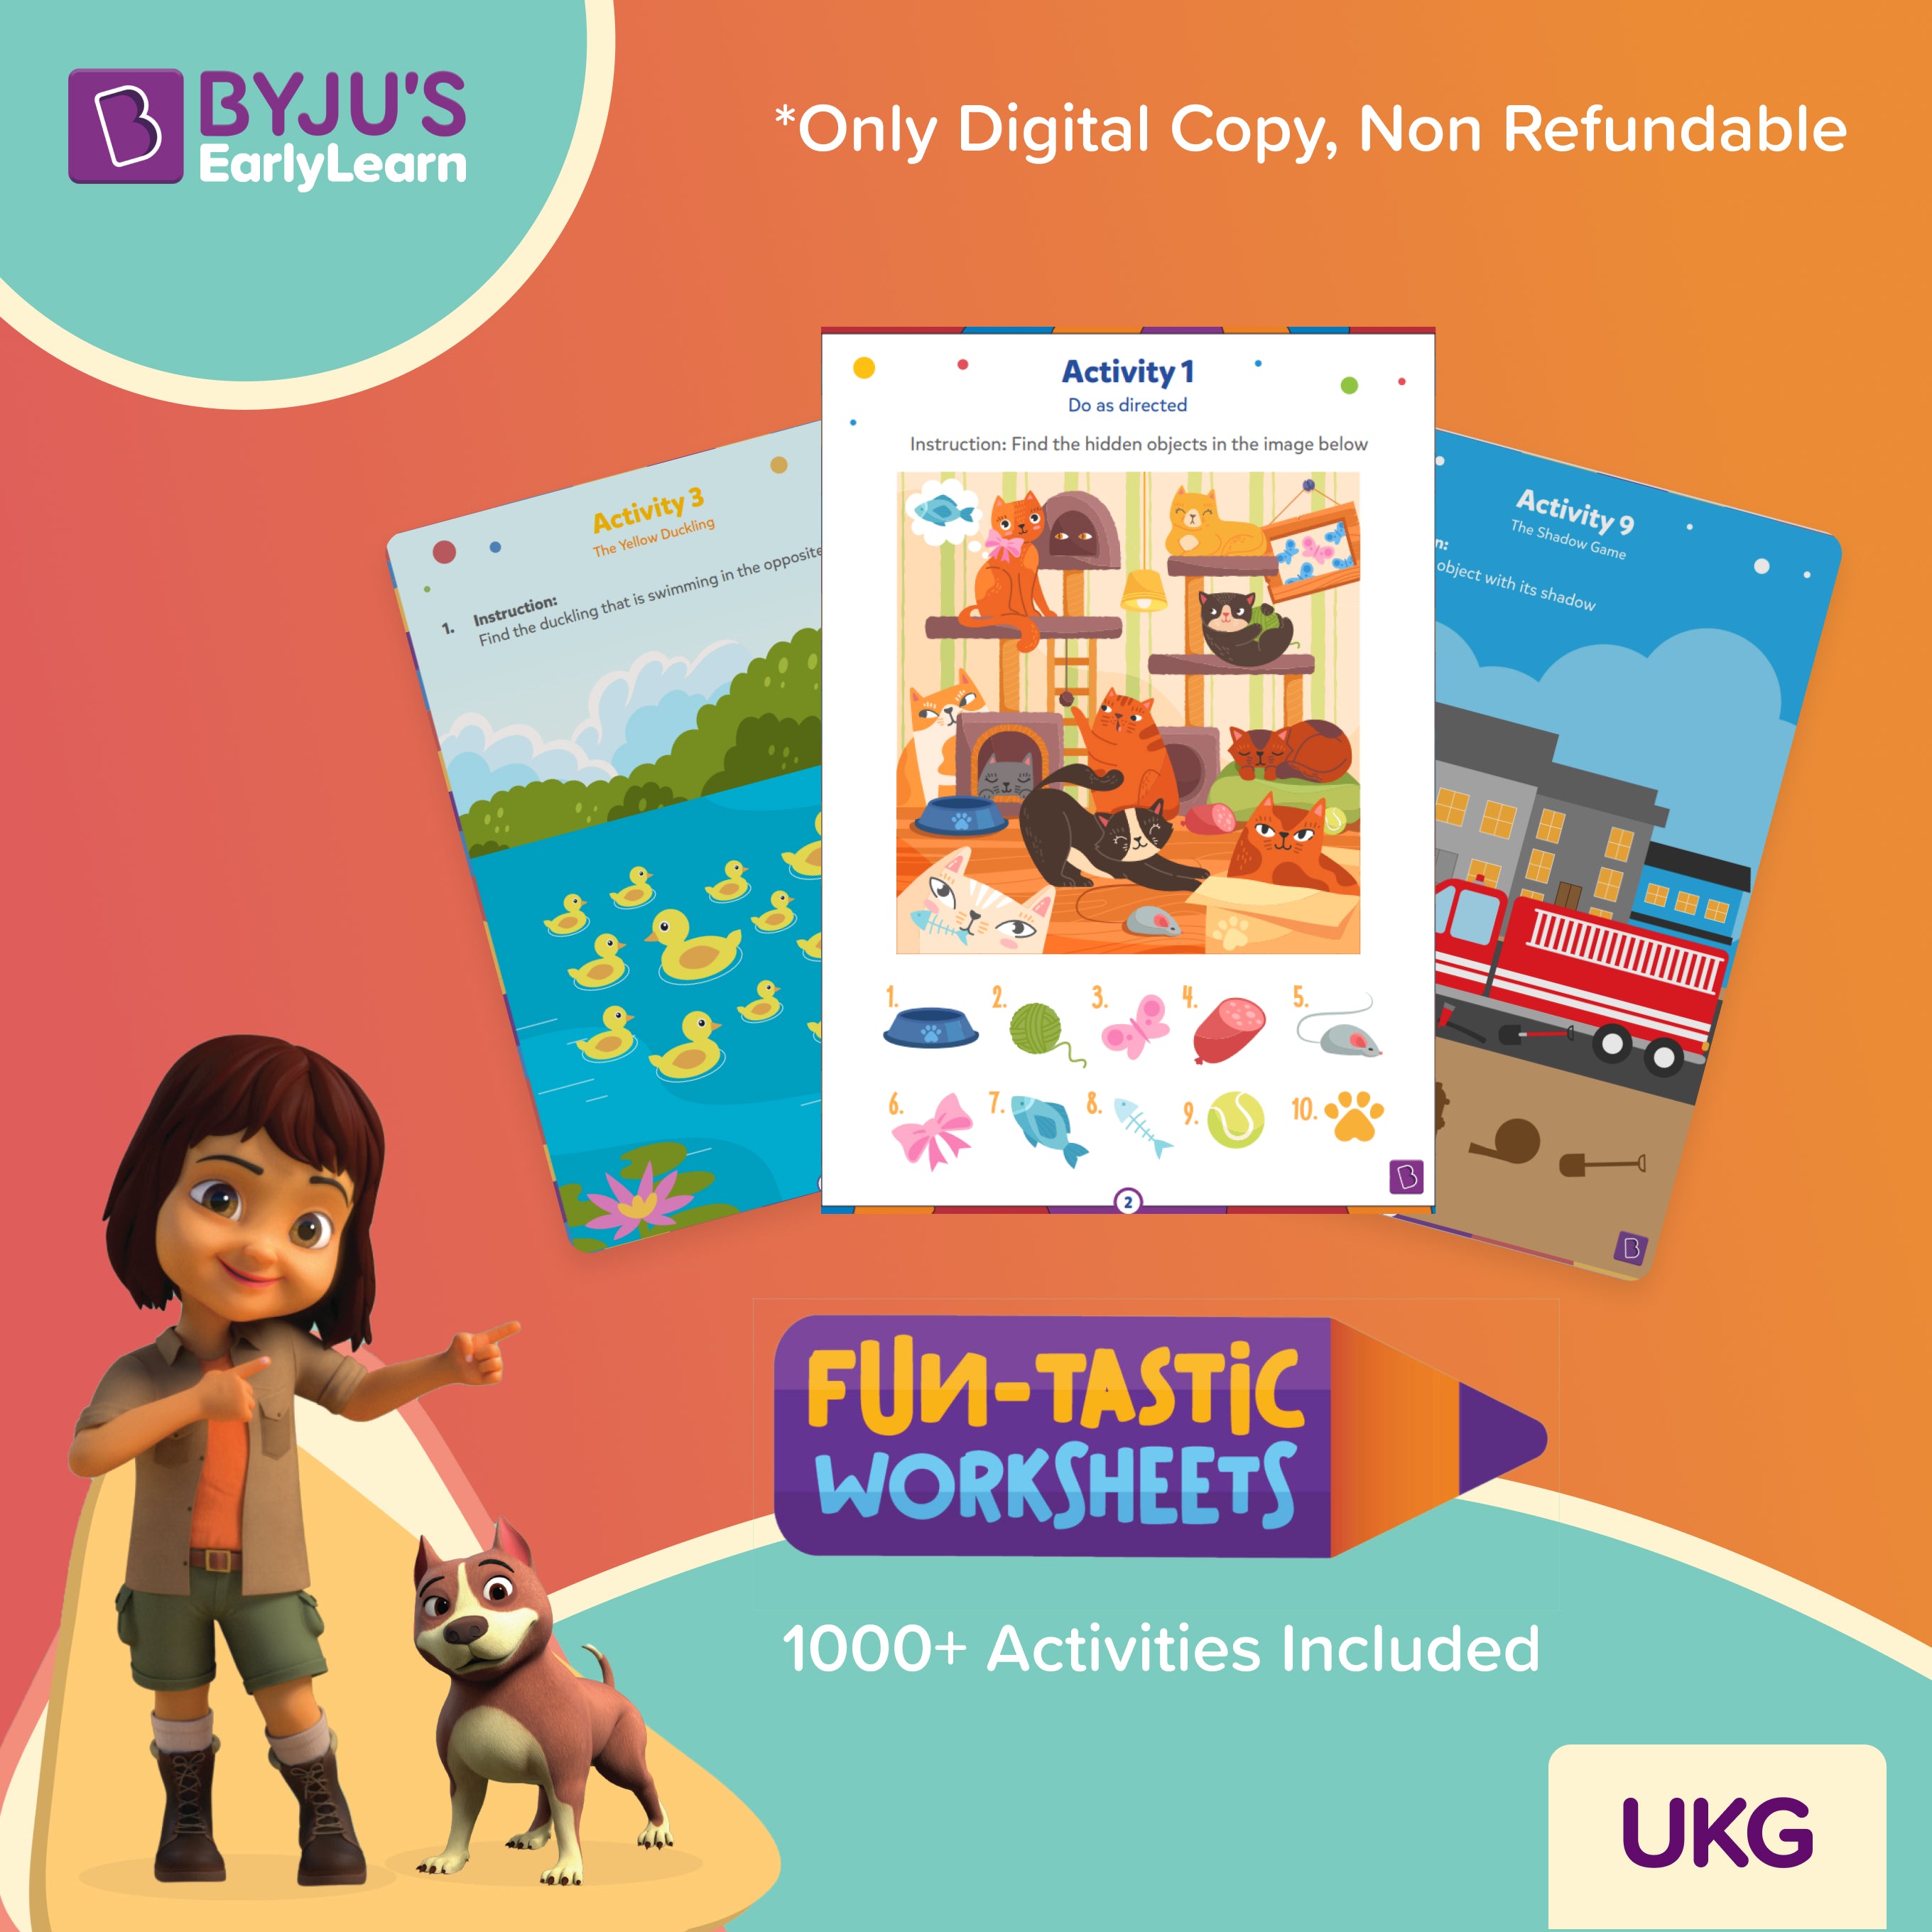 BYJU'S Early Learn - Fun Worksheets & Activities | UKG